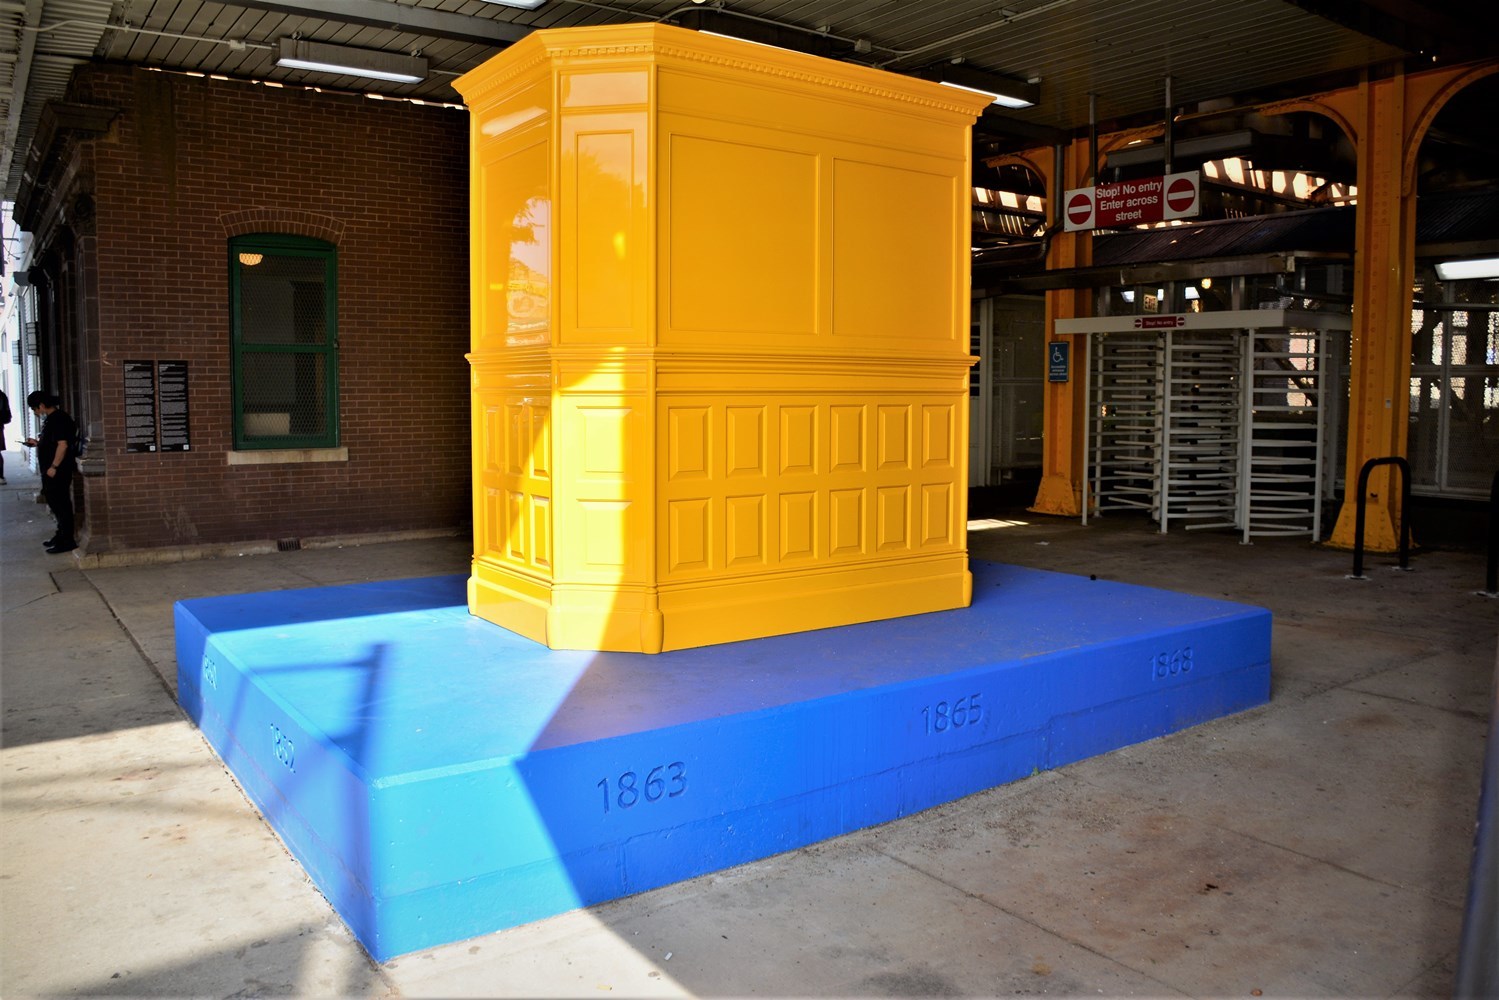 A solid yellow replica of historic ticket agenct booth featured at Diversey sits in the plaza of the station and is just one four elements to the new art installation known as "Ordinary Relic."